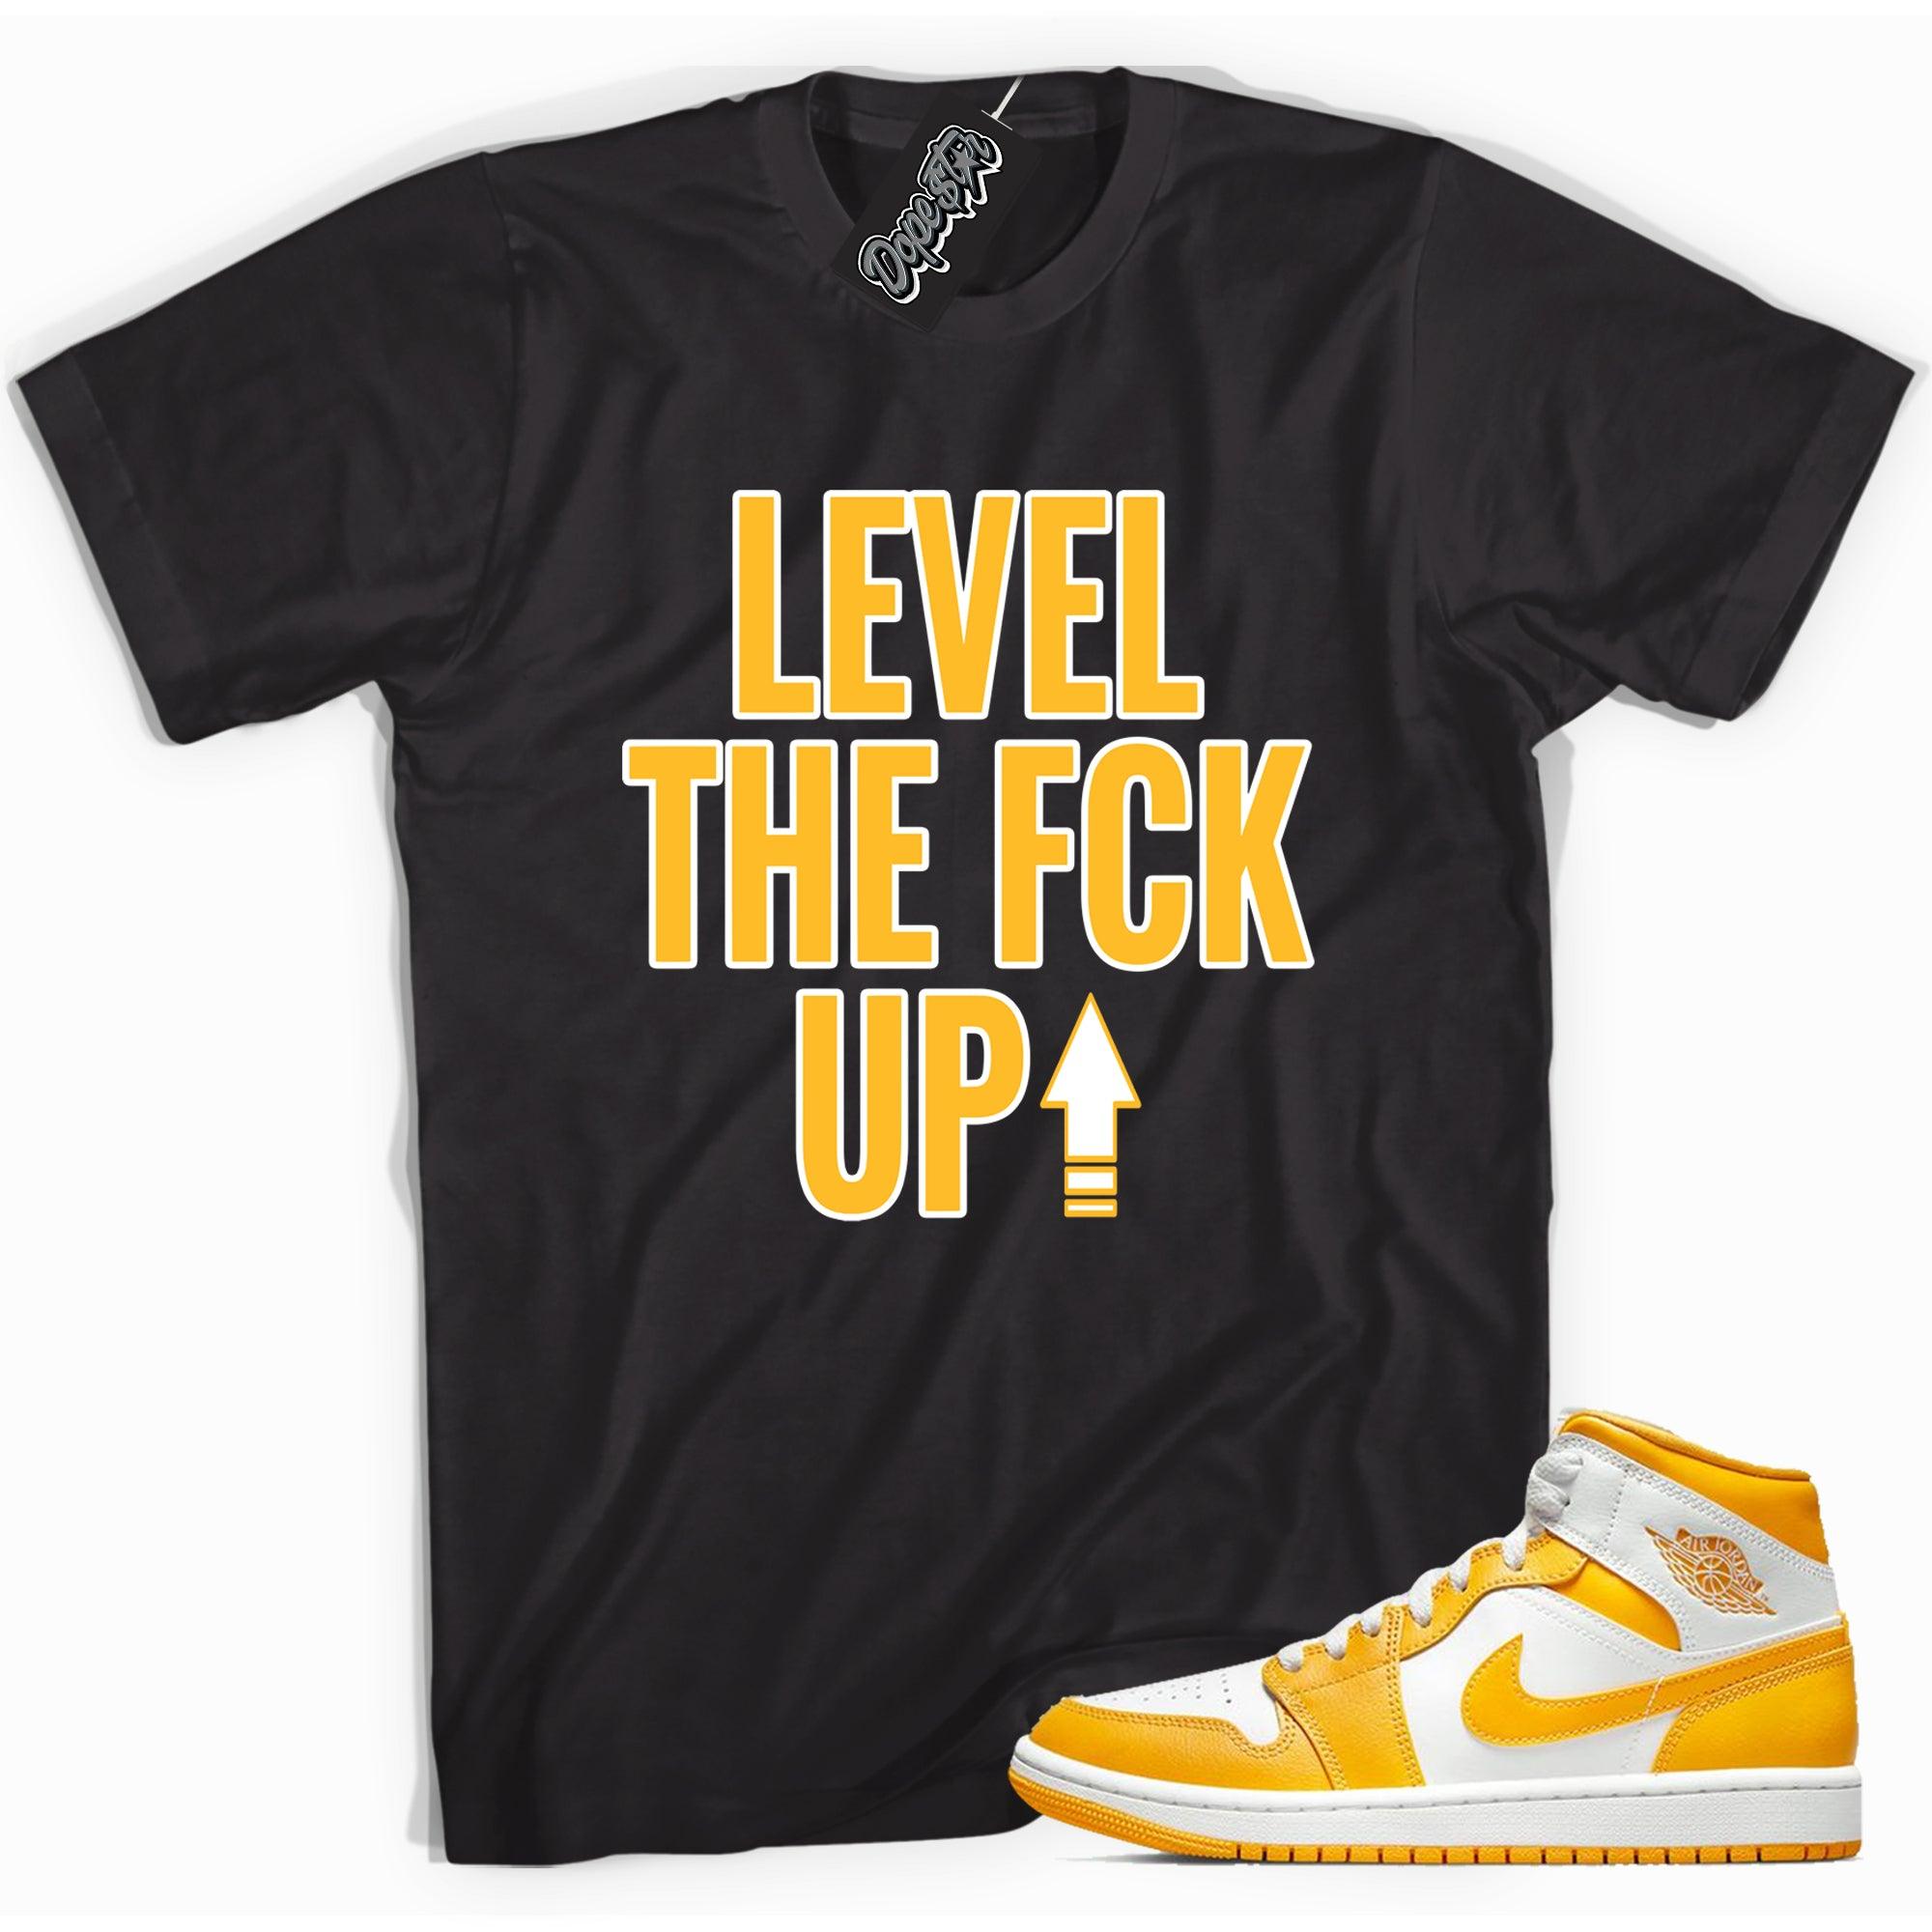 Cool black graphic tee with 'Level Up' print, that perfectly matches Air Jordan 1 Mid White University Gold sneakers.